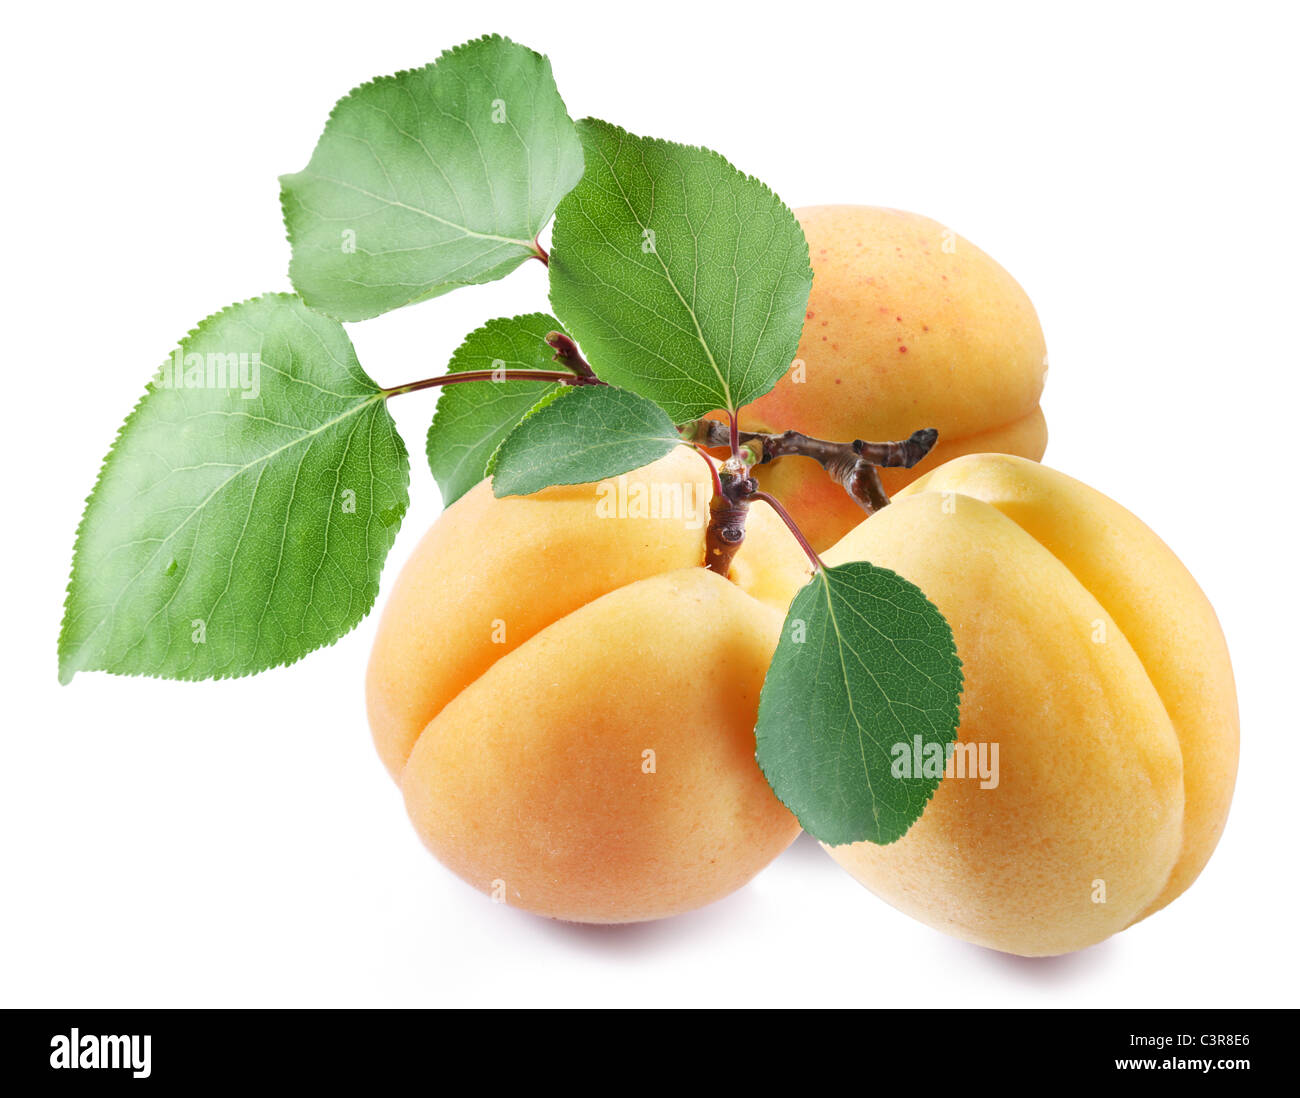 Ripe apricots with leaves on white background Stock Photo